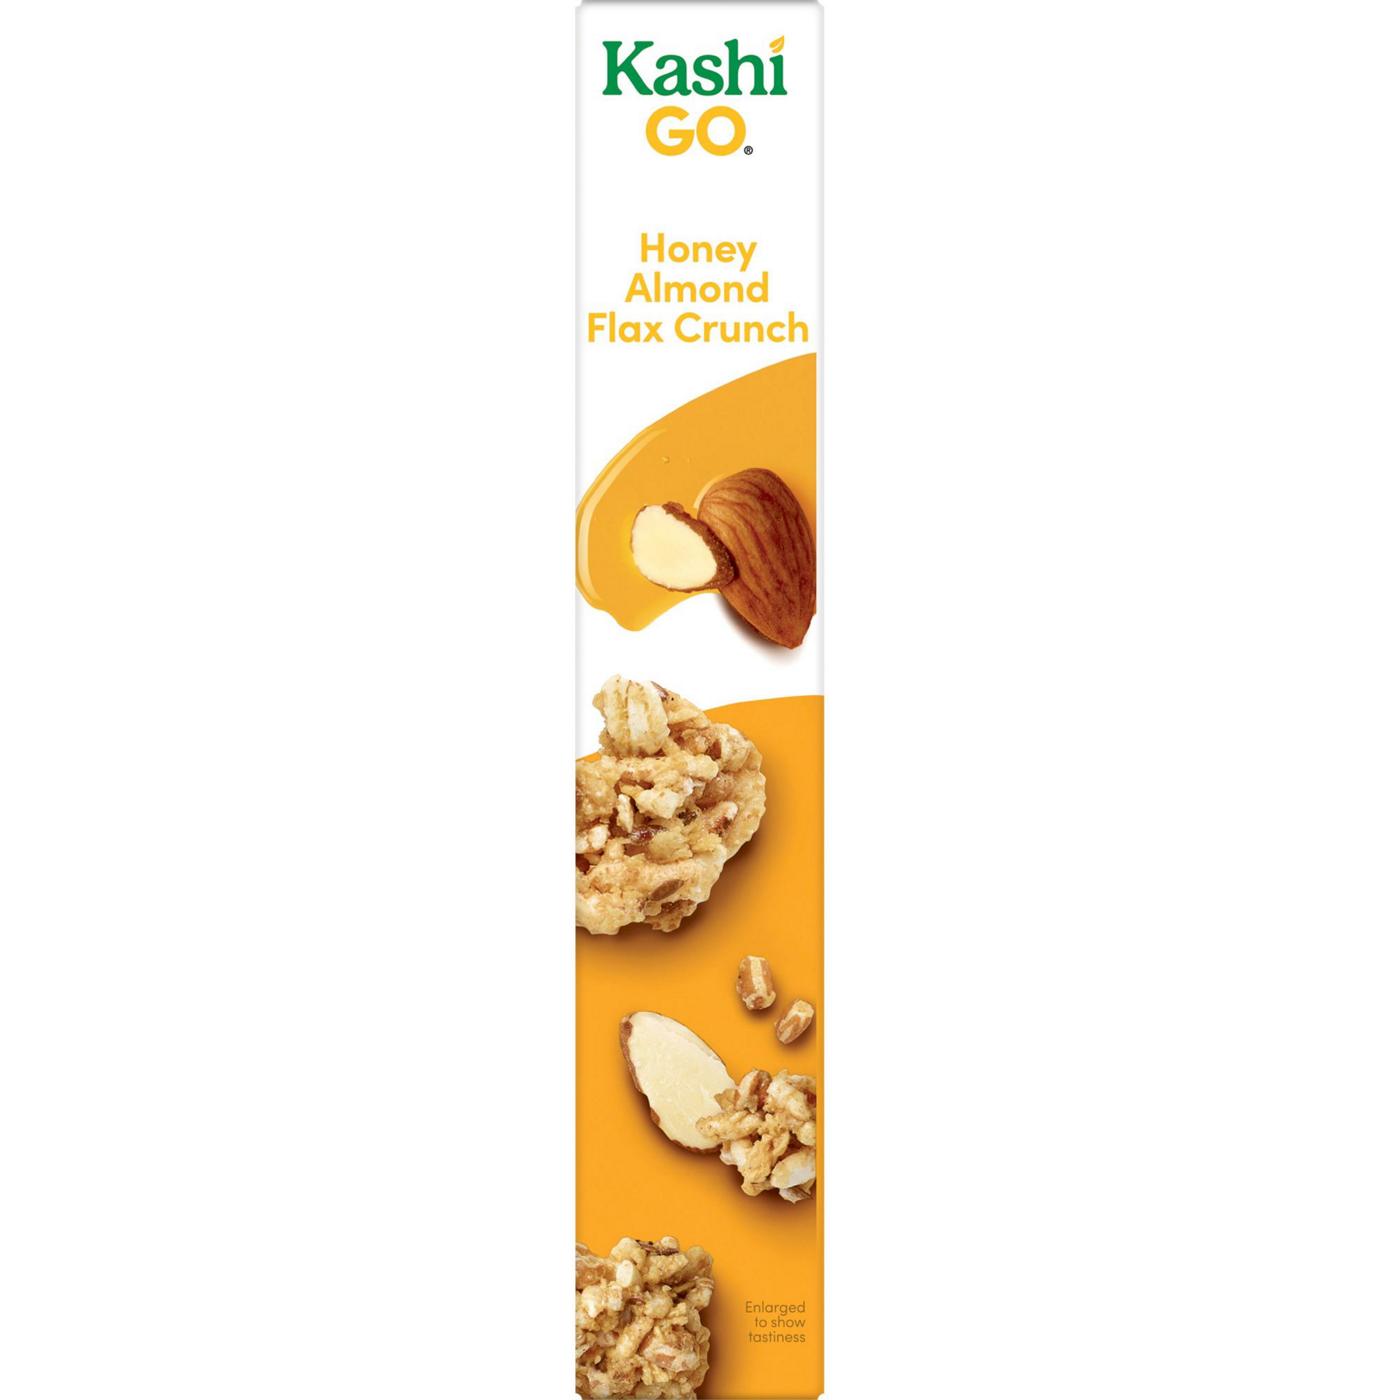 Kashi GO Honey Almond Flax Crunch Breakfast Cereal; image 9 of 11